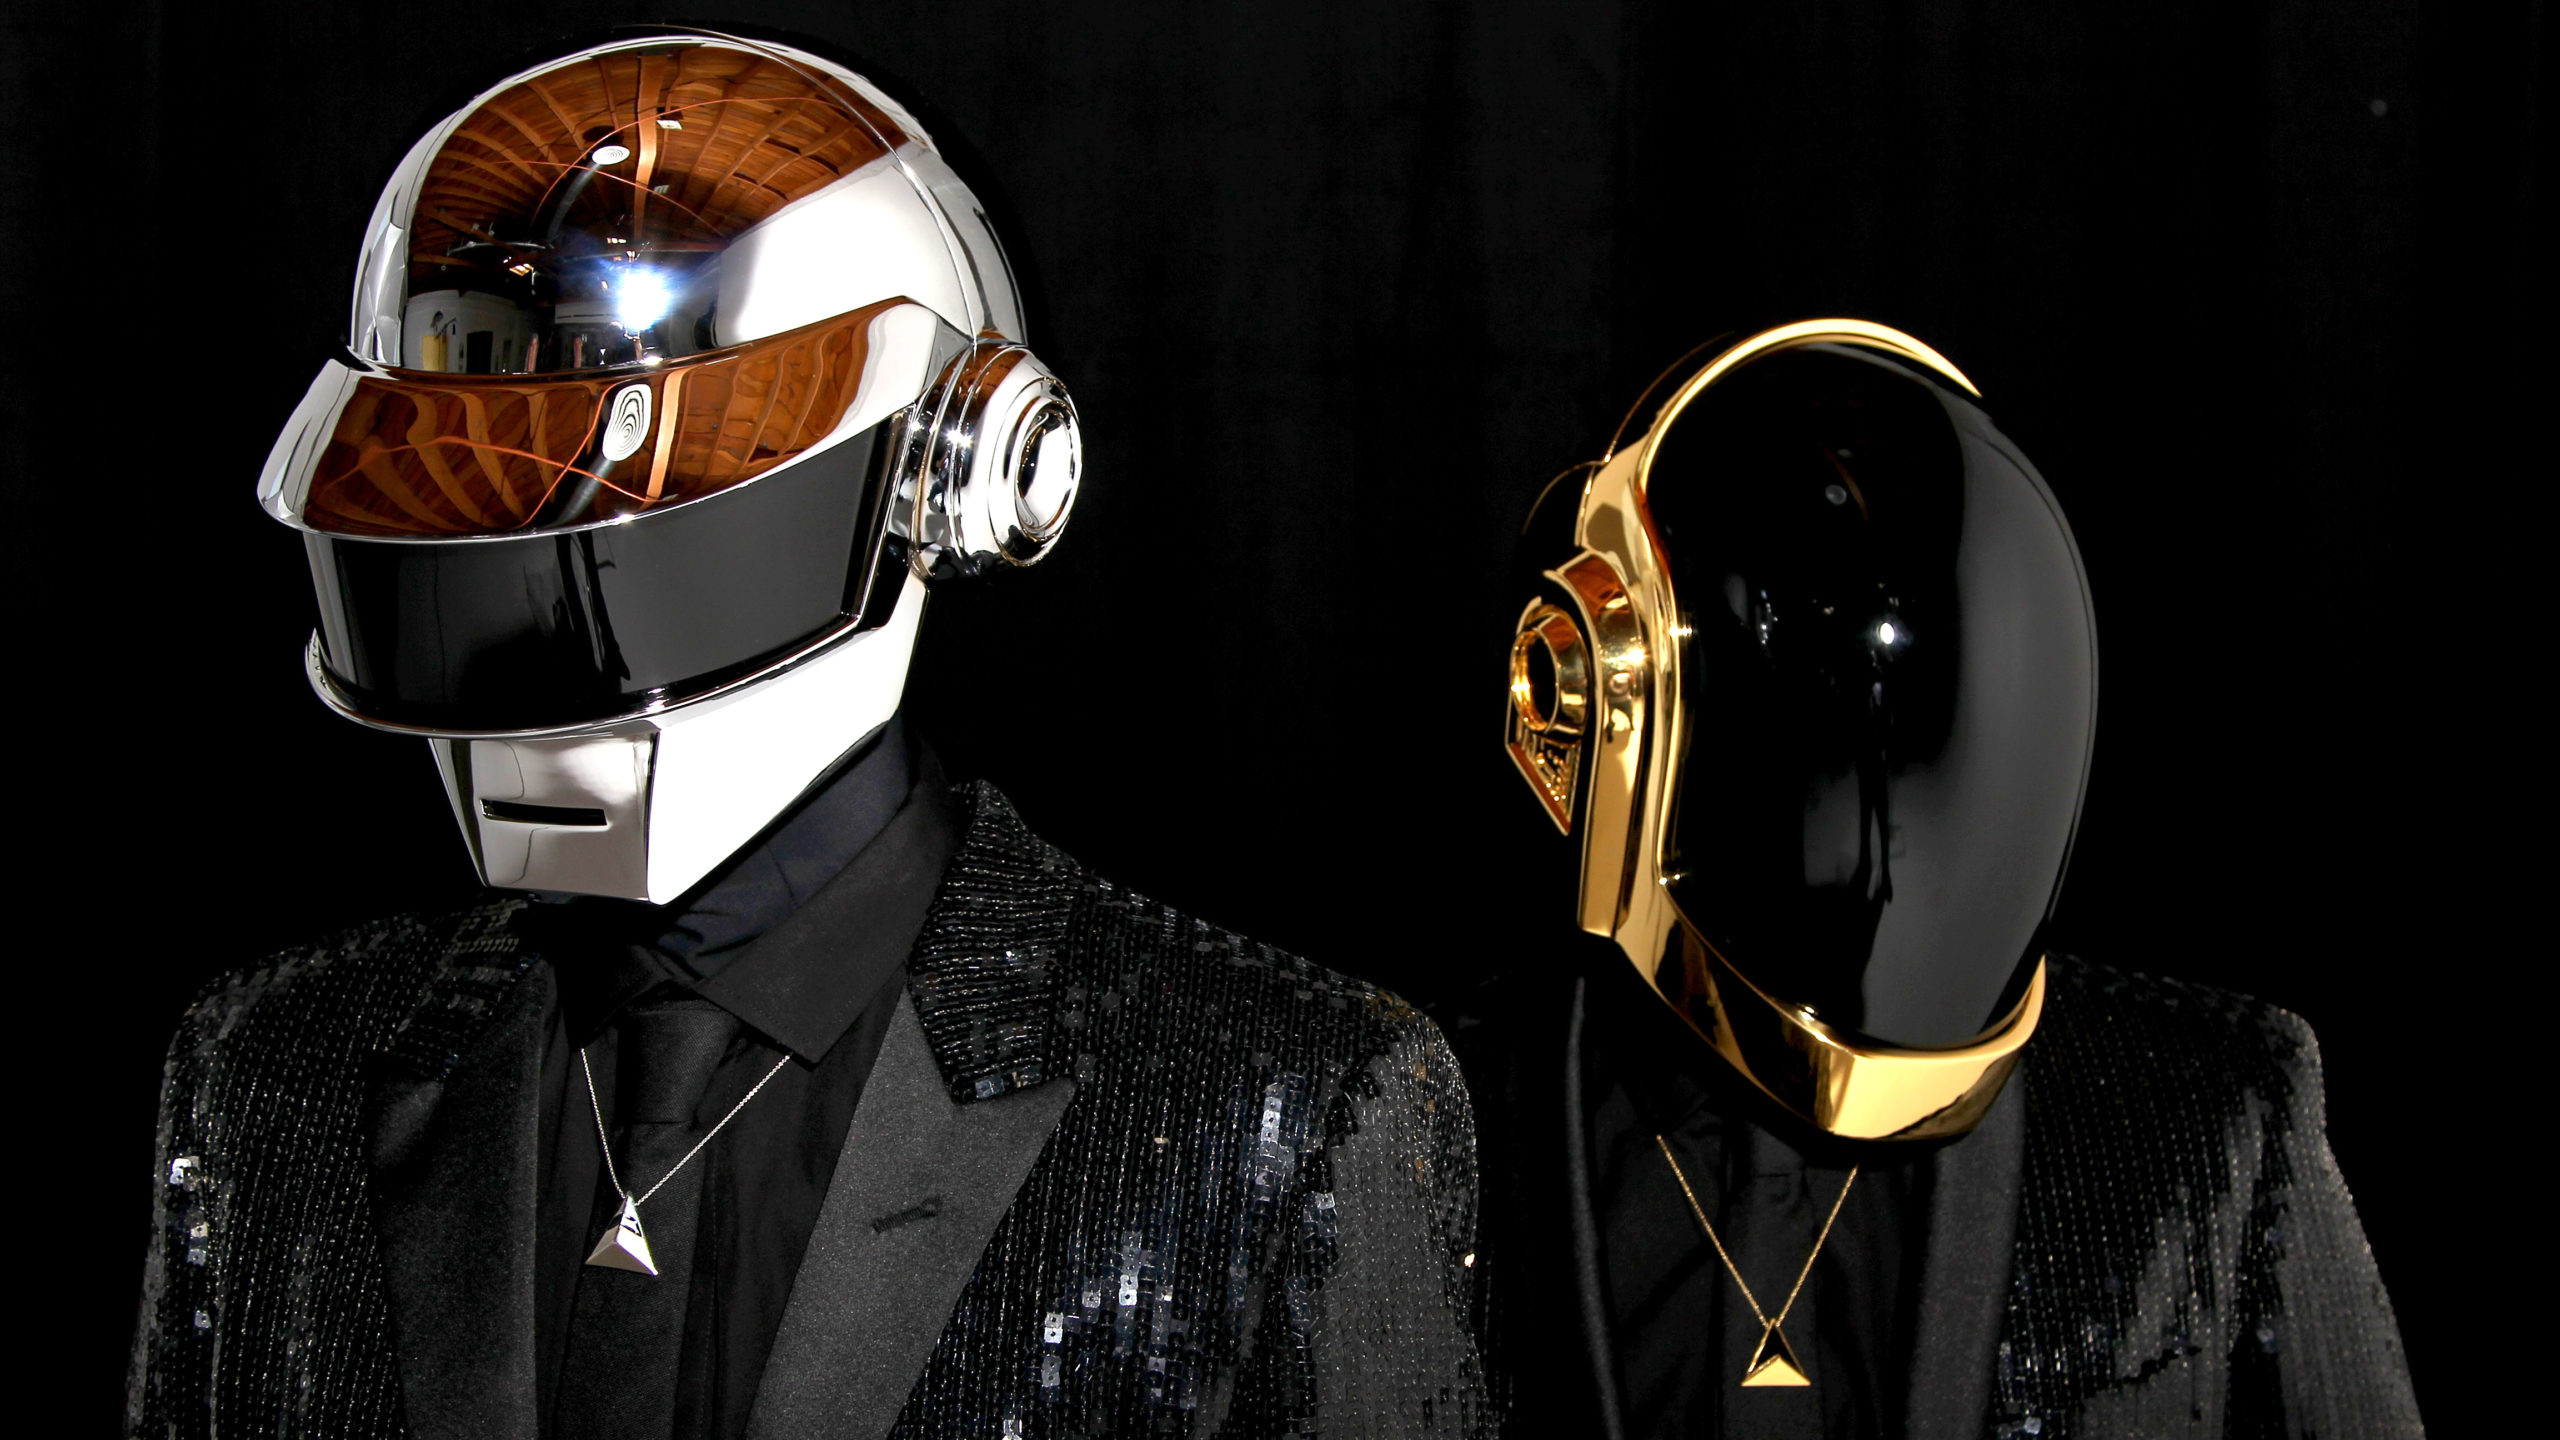 Daft Punk Working On New Music - Ransom Note